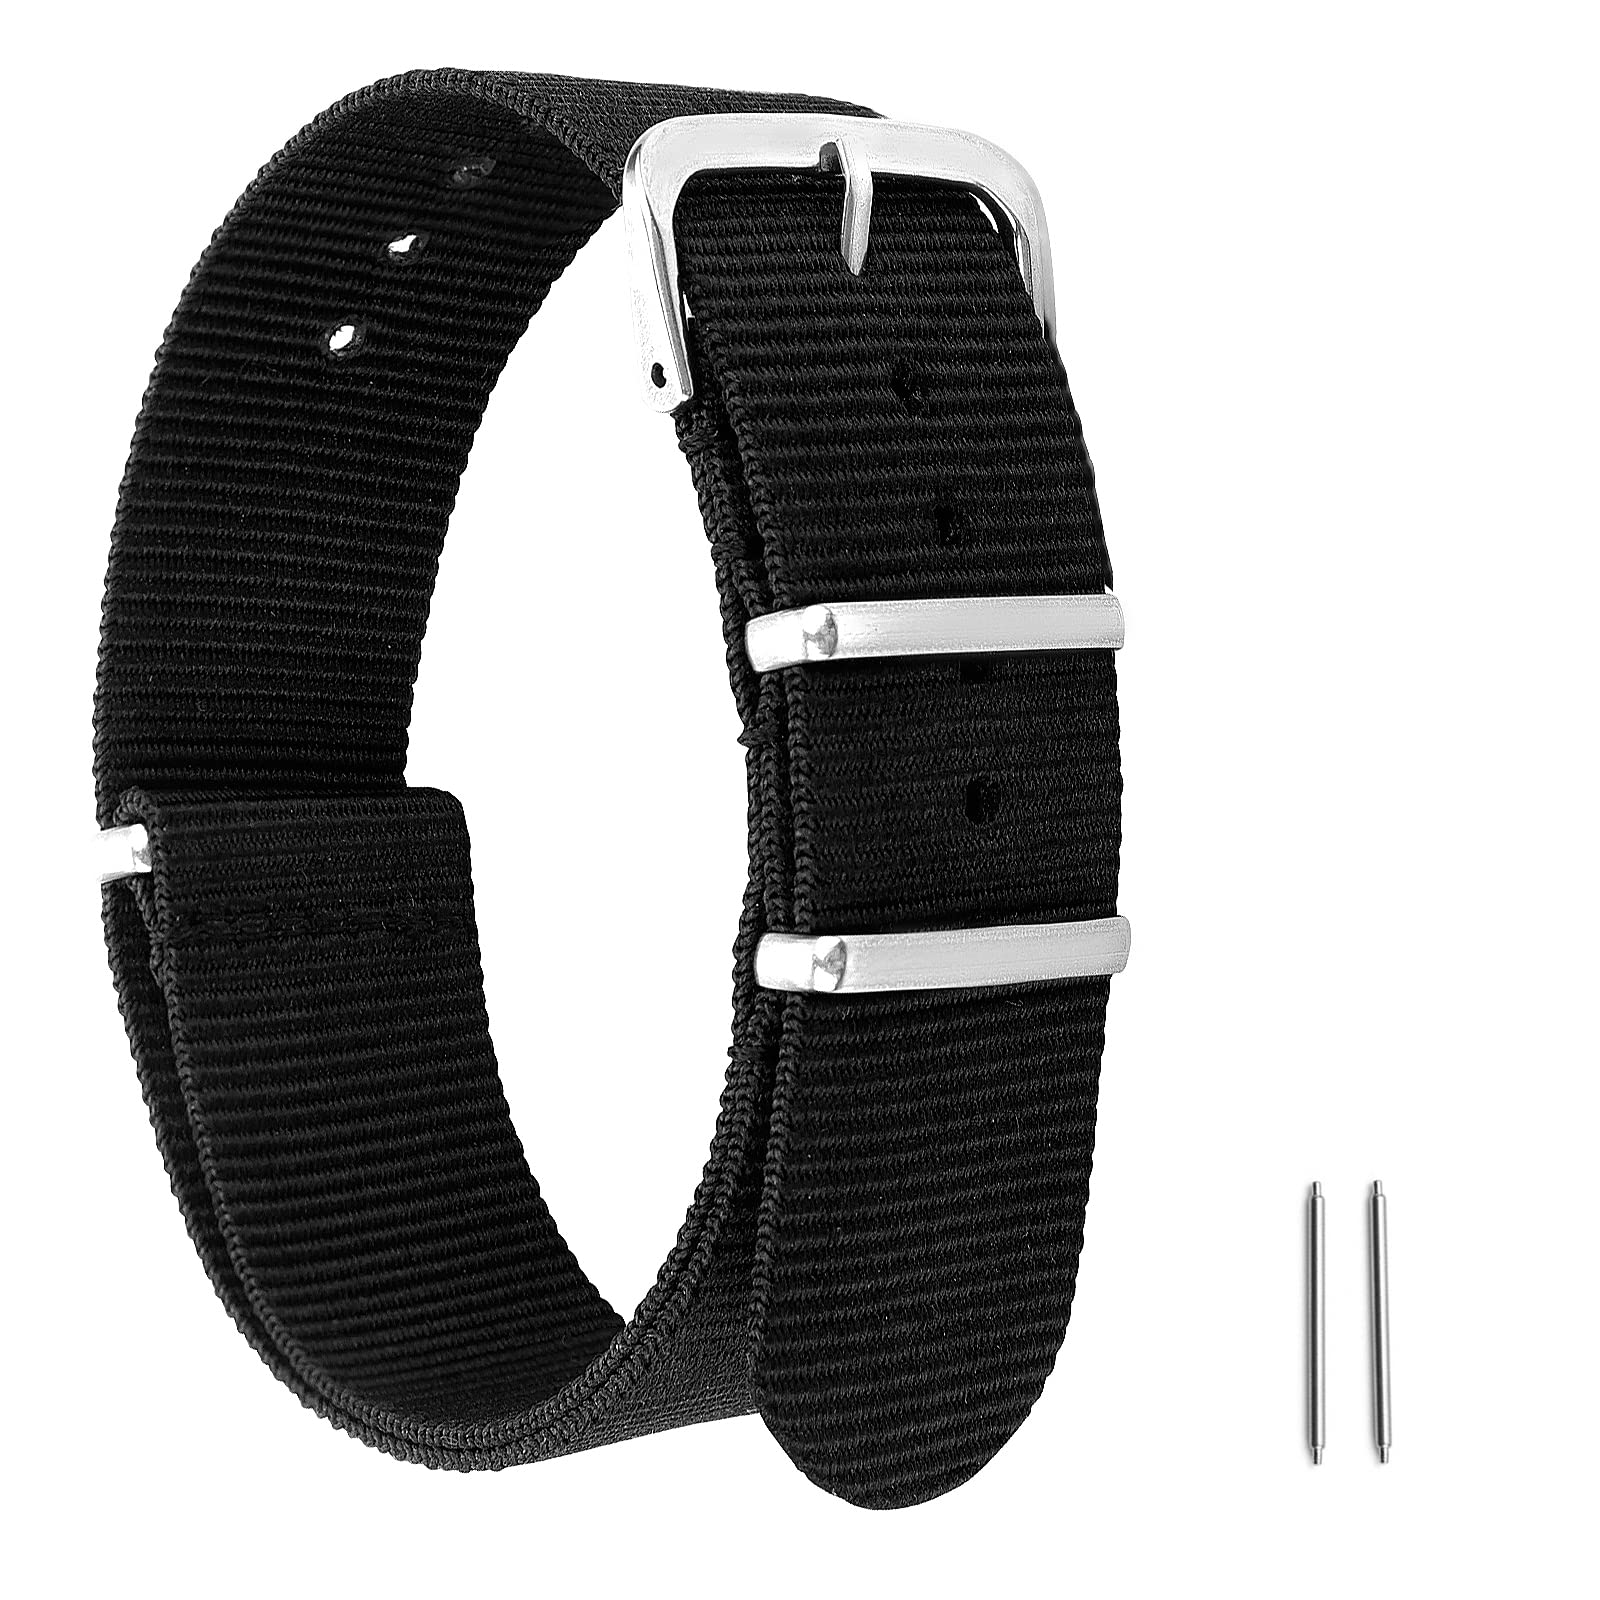 cobee Nylon Watch Straps, Straps for Men/Women Replacement Military 4 Rings Watch Bands Adjustable Wrist Straps with Silver Metal Buckle 18mm/20mm/22mm Lug Width